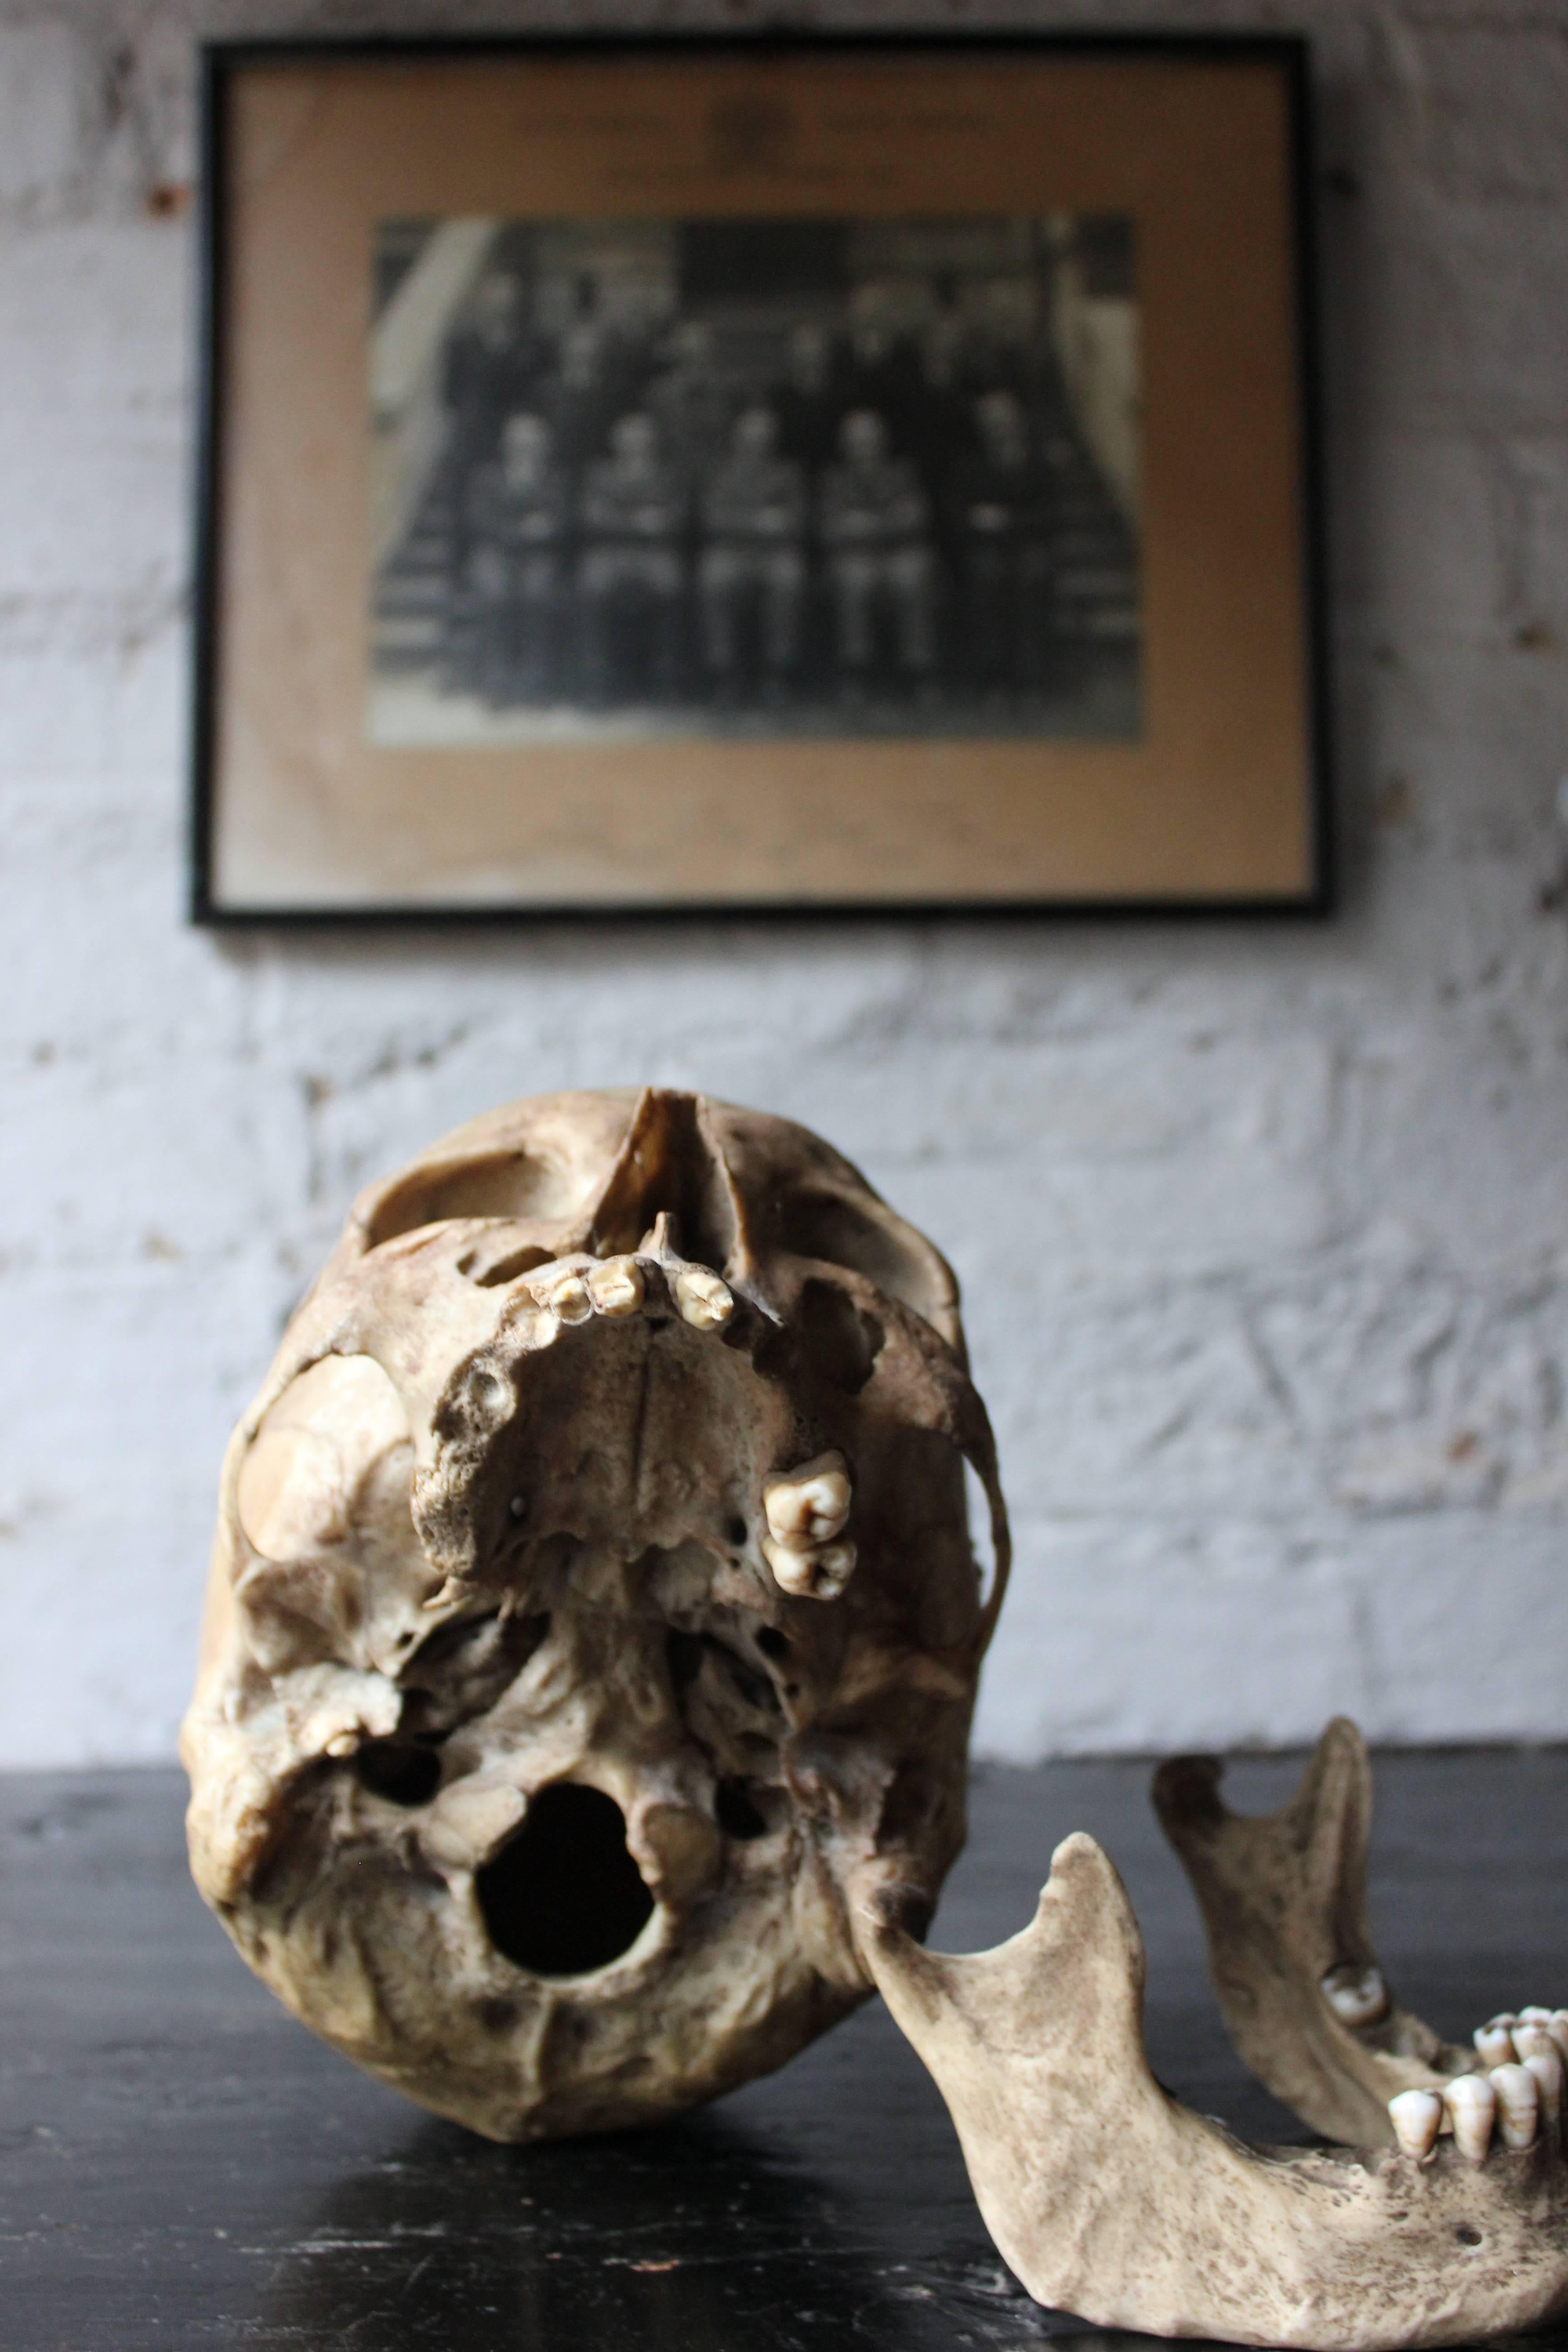 The largely in-tact human skull dating to at least the early twentieth century, having bee used for odontology and medical study together with a black and white photograph of Guy's Hospital Dental School House Officers, taken in November